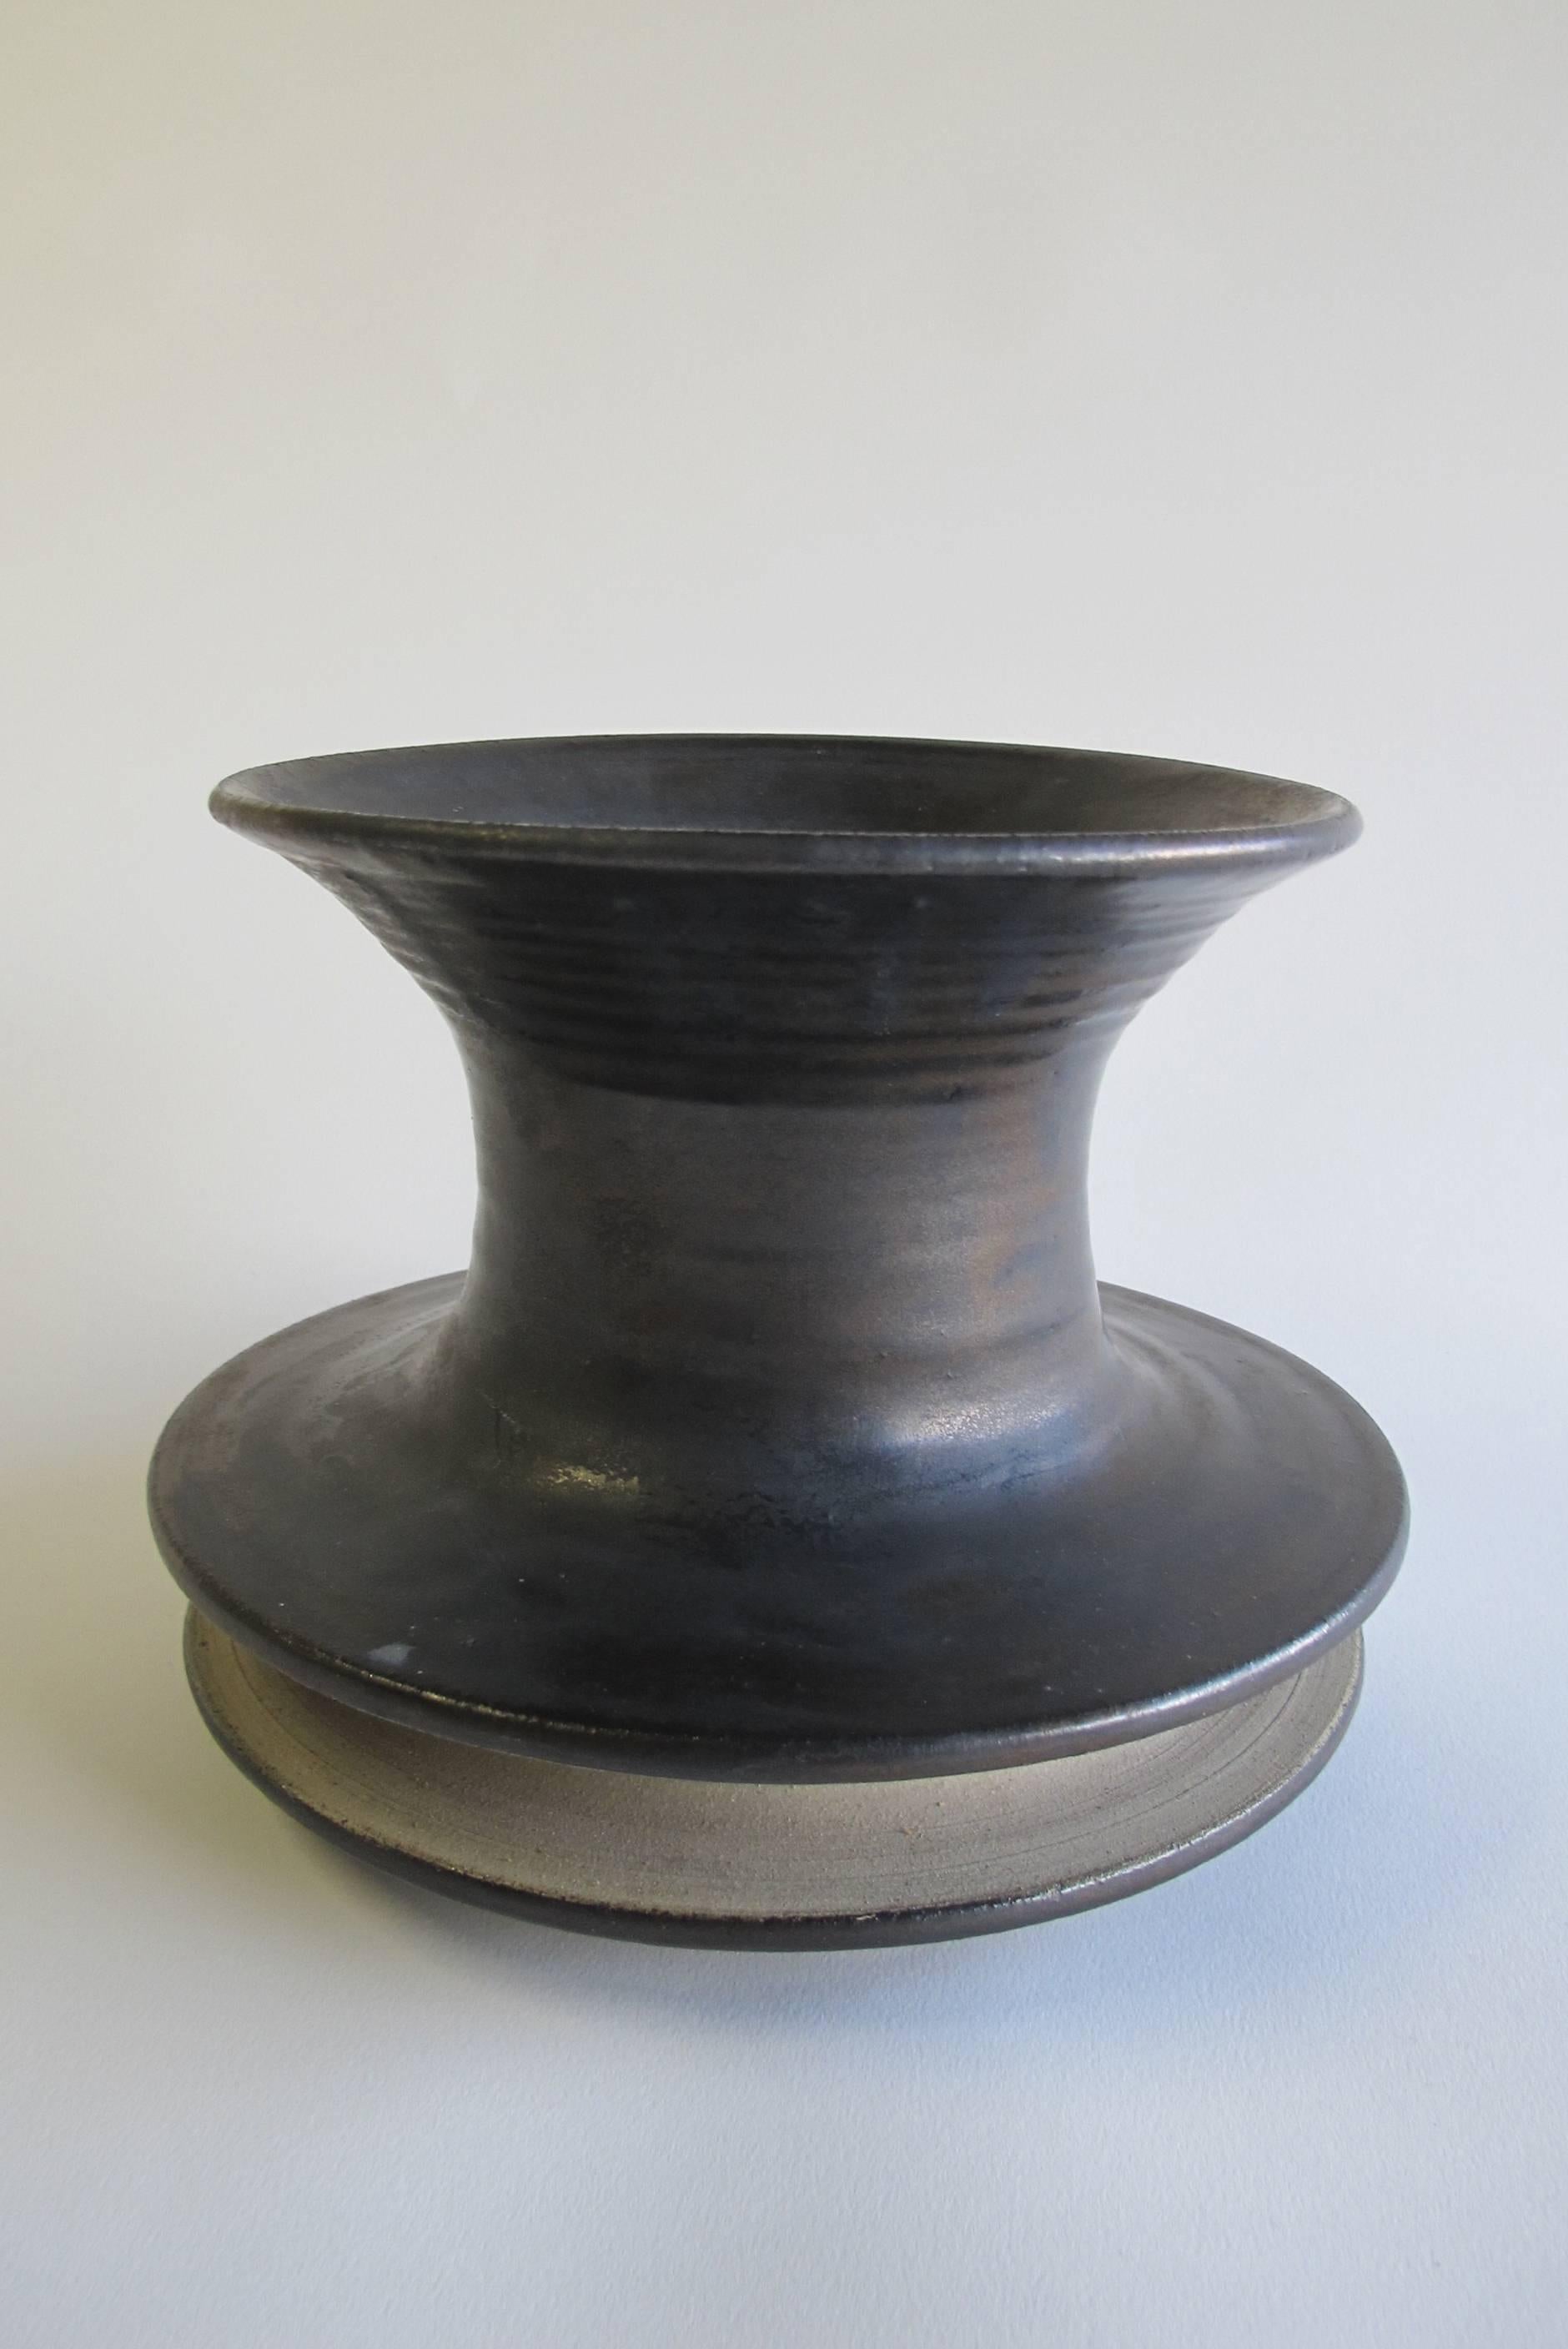 Bronze glazed stoneware vase made by Jan van der Vaart in 1966 in his own studio. This piece of Dutch Avant Garde pottery with geometric shape and a double collar was executed in 1966 in his own studio. De vase is marked at the bottom with a wheel